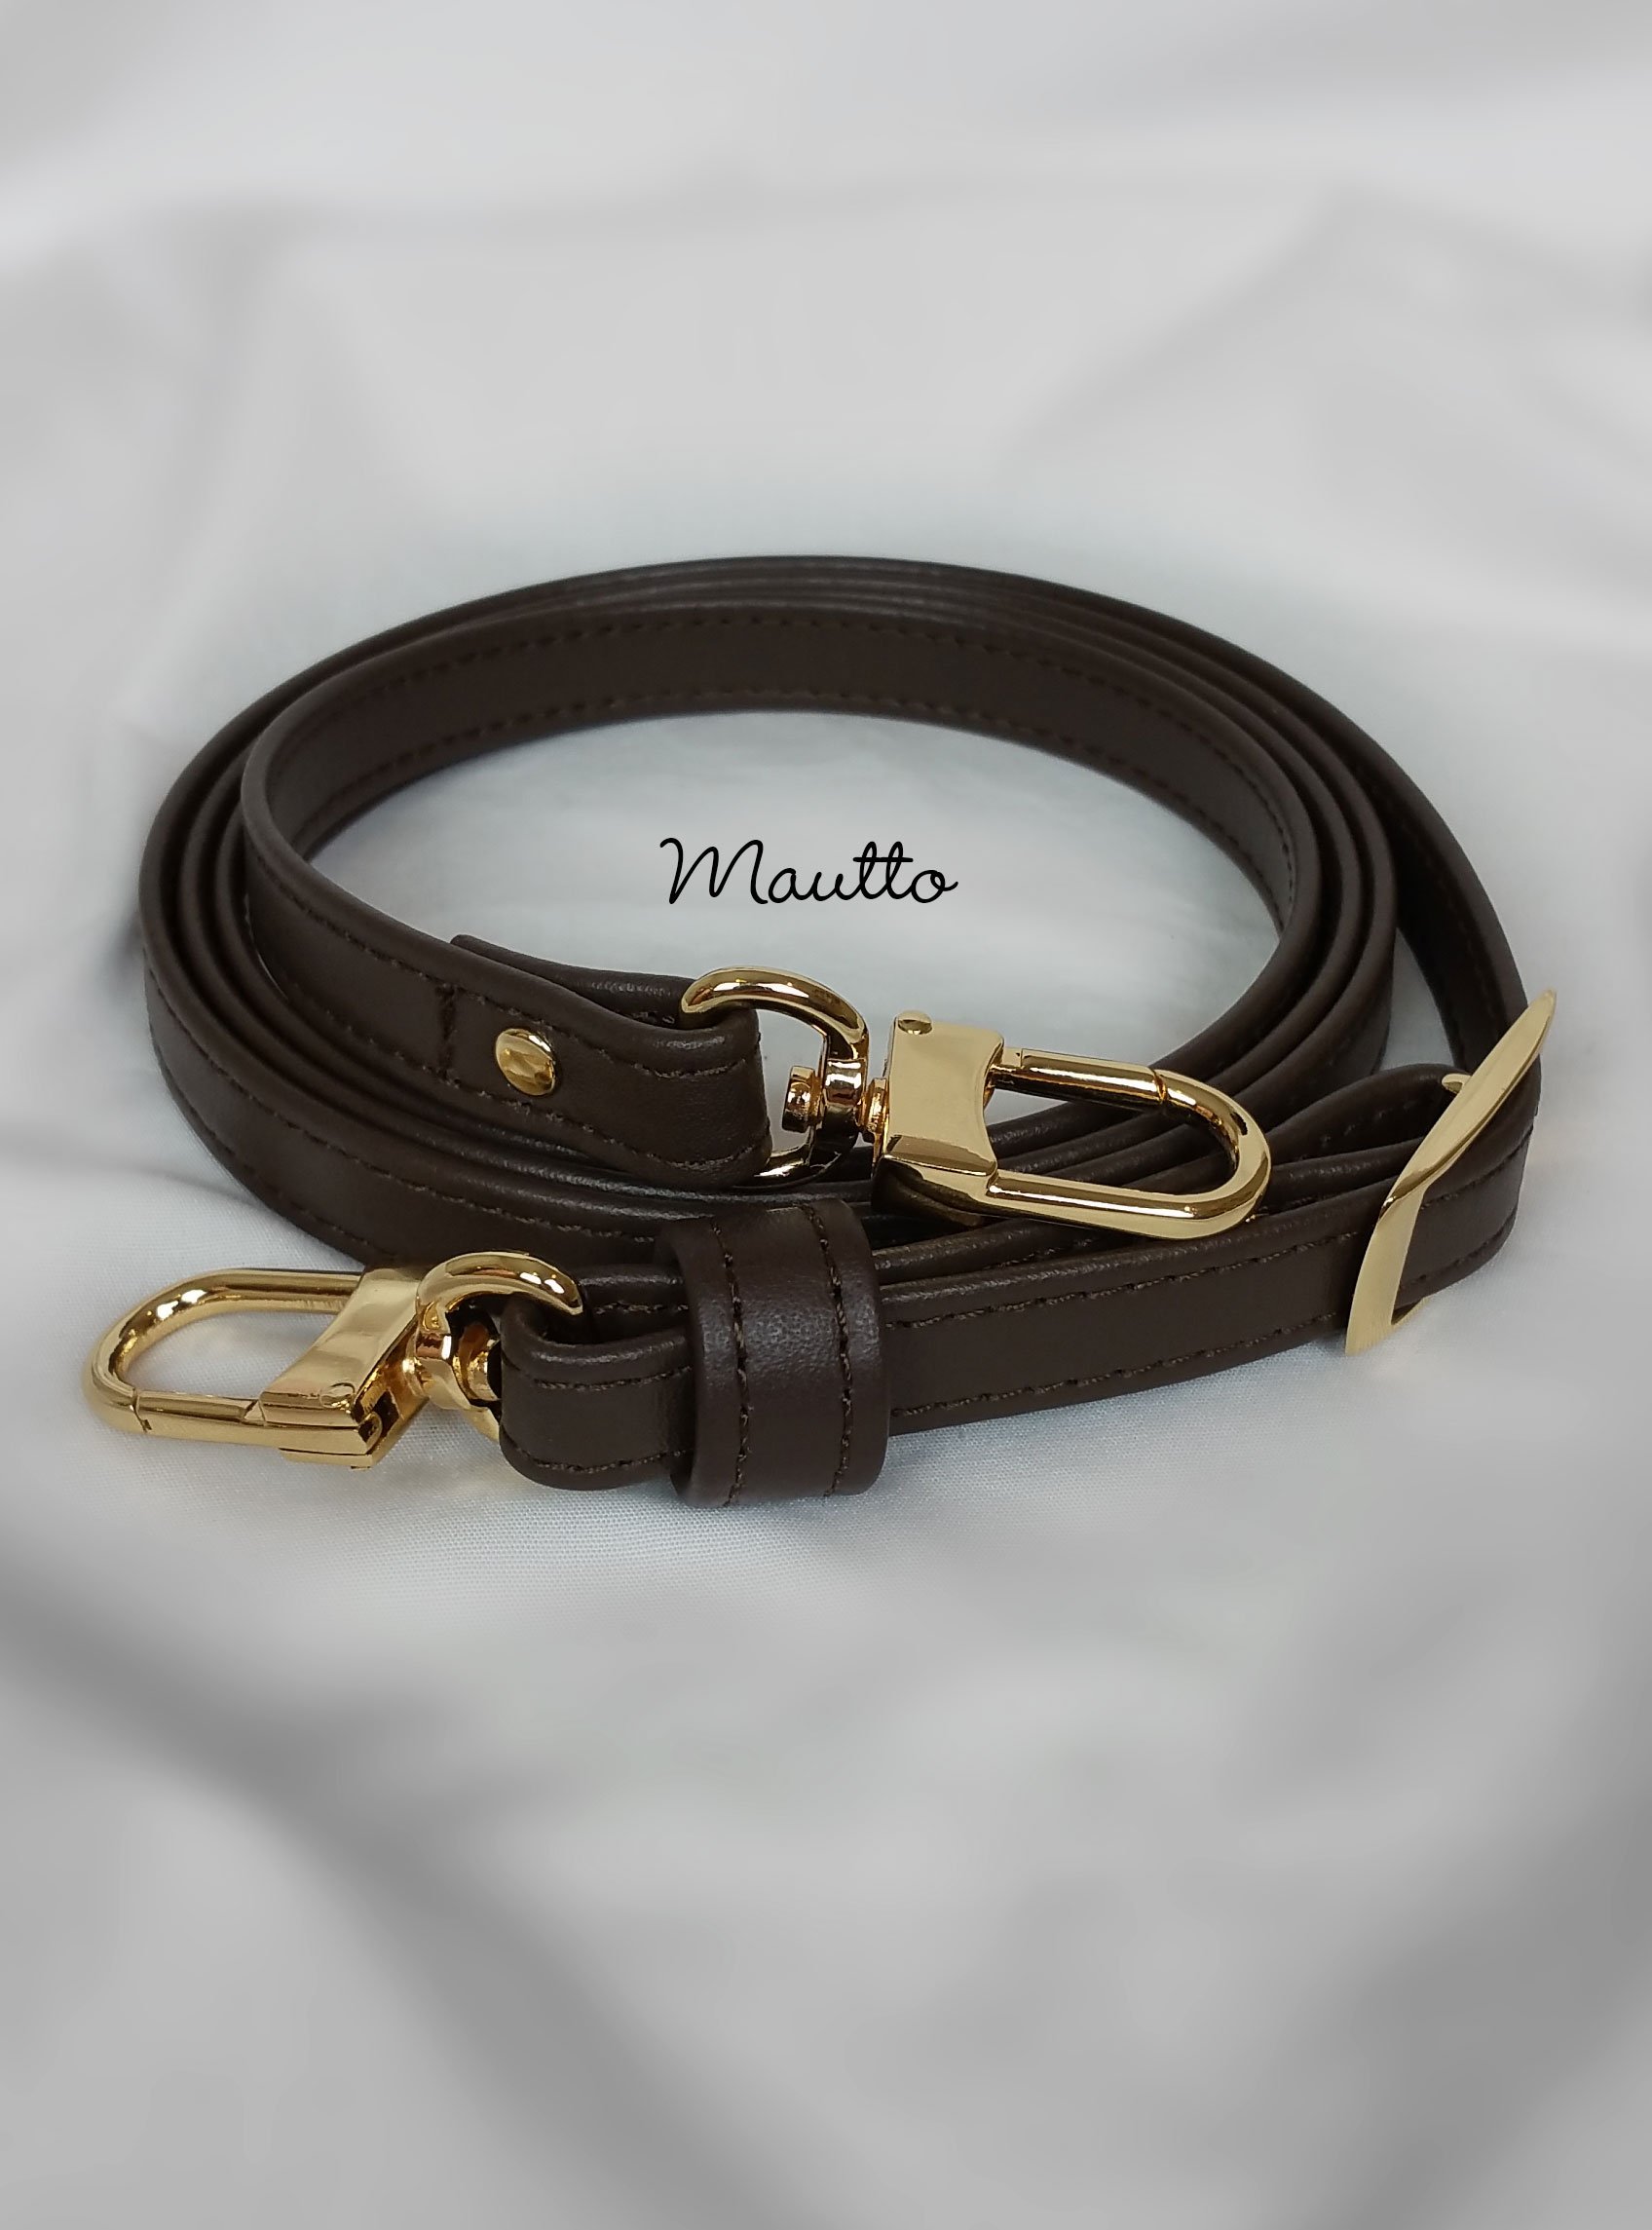 Dark Brown Leather Strap for Louis Vuitton Pochette/Eva/etc - .5 Wide -  Fixed or Adjustable Lengths, Replacement Purse Straps & Handbag  Accessories - Leather, Chain & more